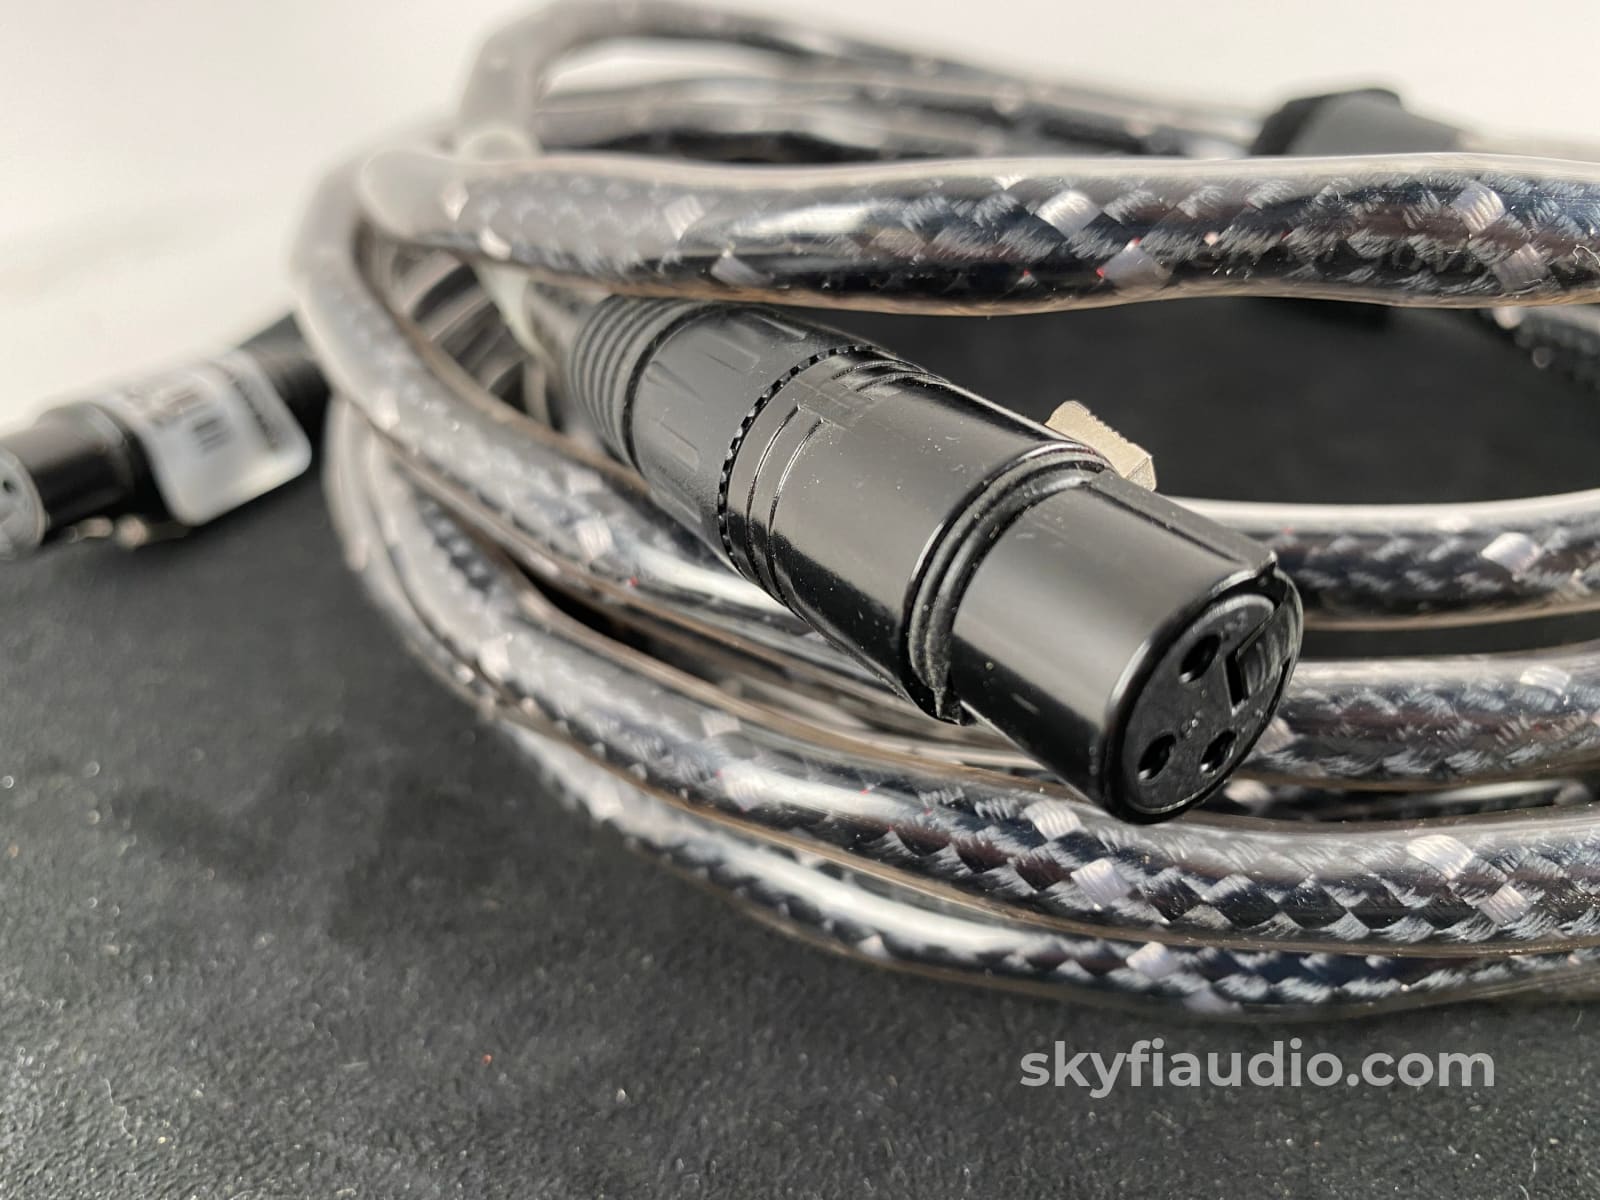 Straightwire Virtuoso R2 Xlr Interconnects (Pair) - 3M Cables